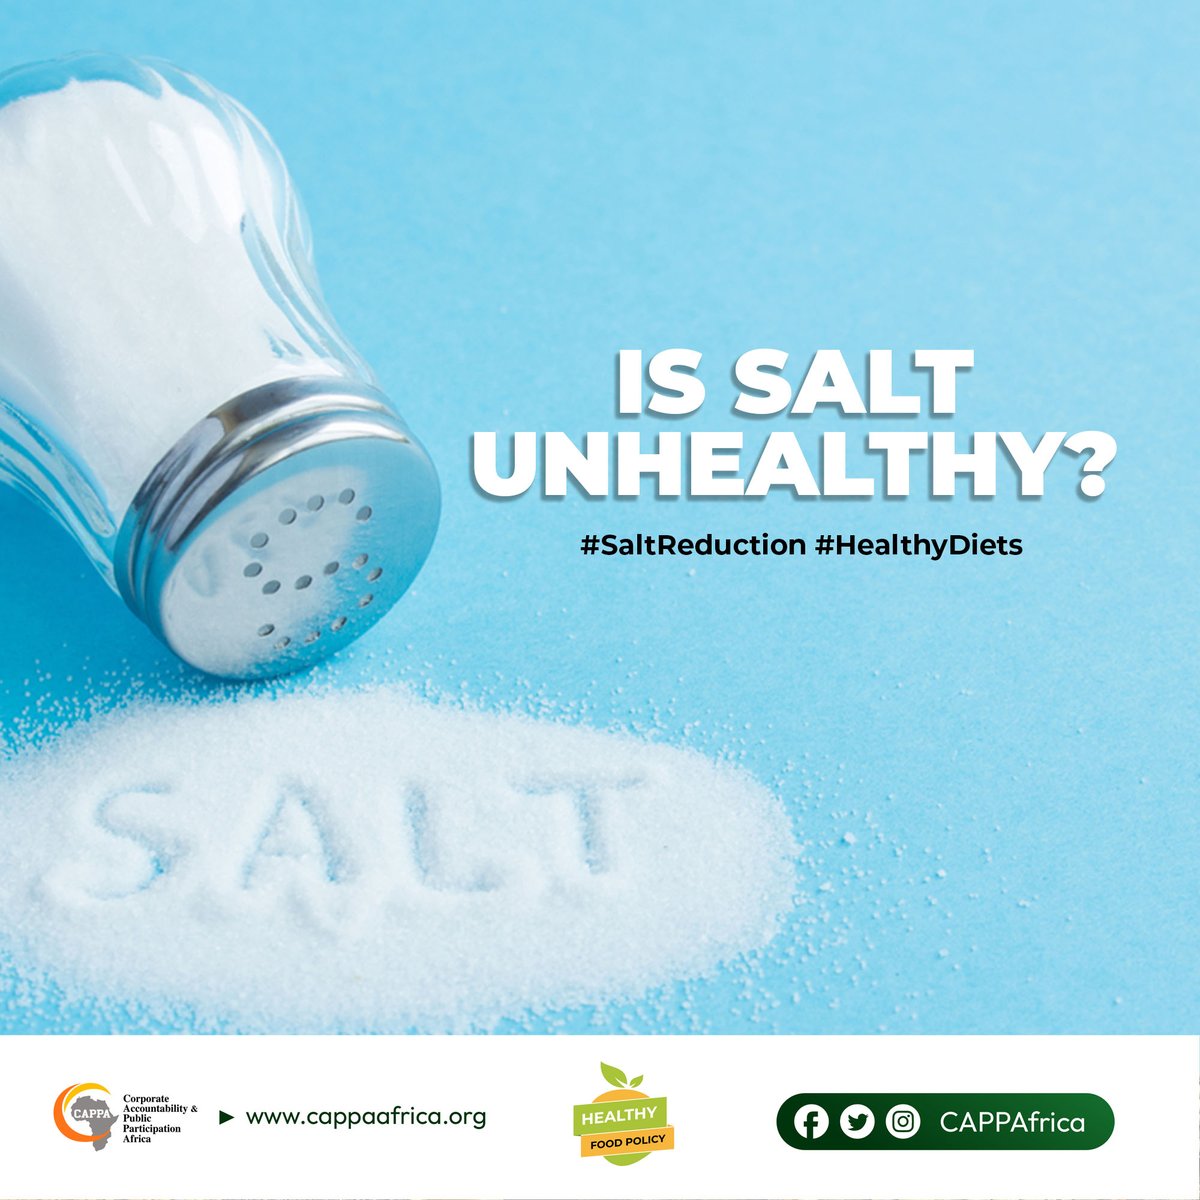 Salt contains sodium. Sodium is an essential nutrient that is required for the body to function properly. However, if we take more than a level teaspoon (5g) of salt per day frequently, it will lead to high blood pressure. #SaltReduction #HealthyDiets